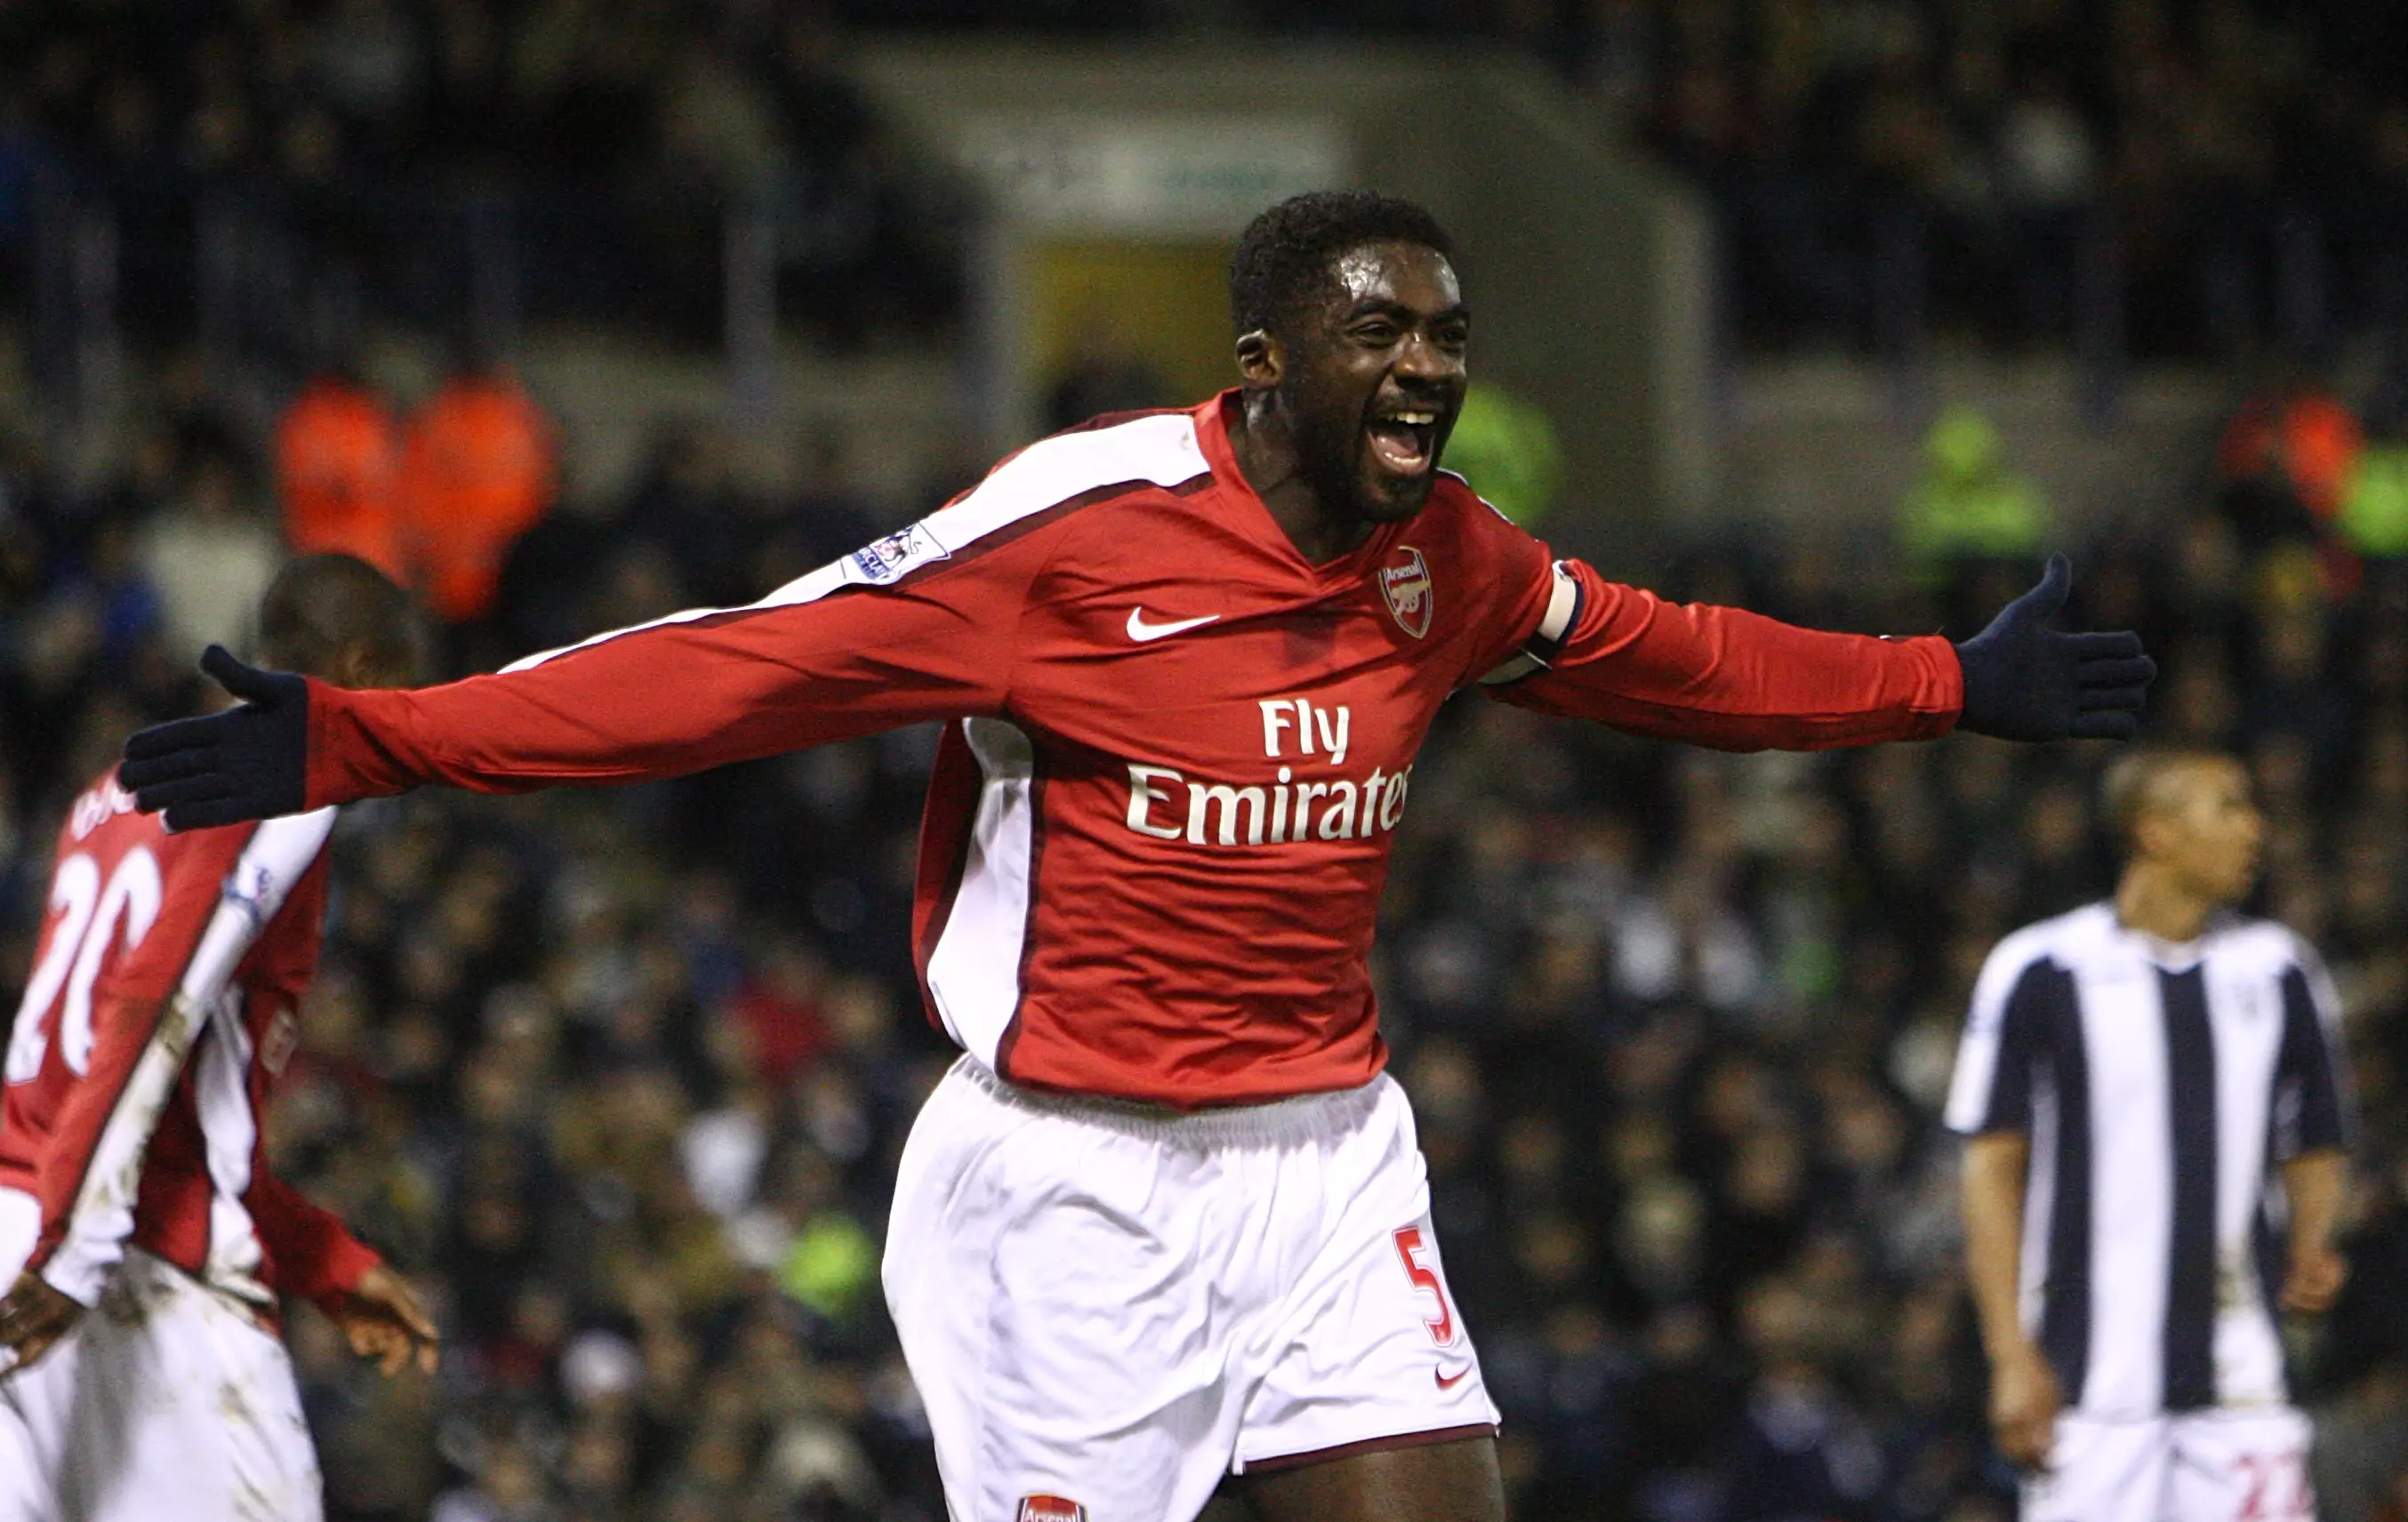 The Story Of Kolo Toure's Arsenal Trial Is Amazing